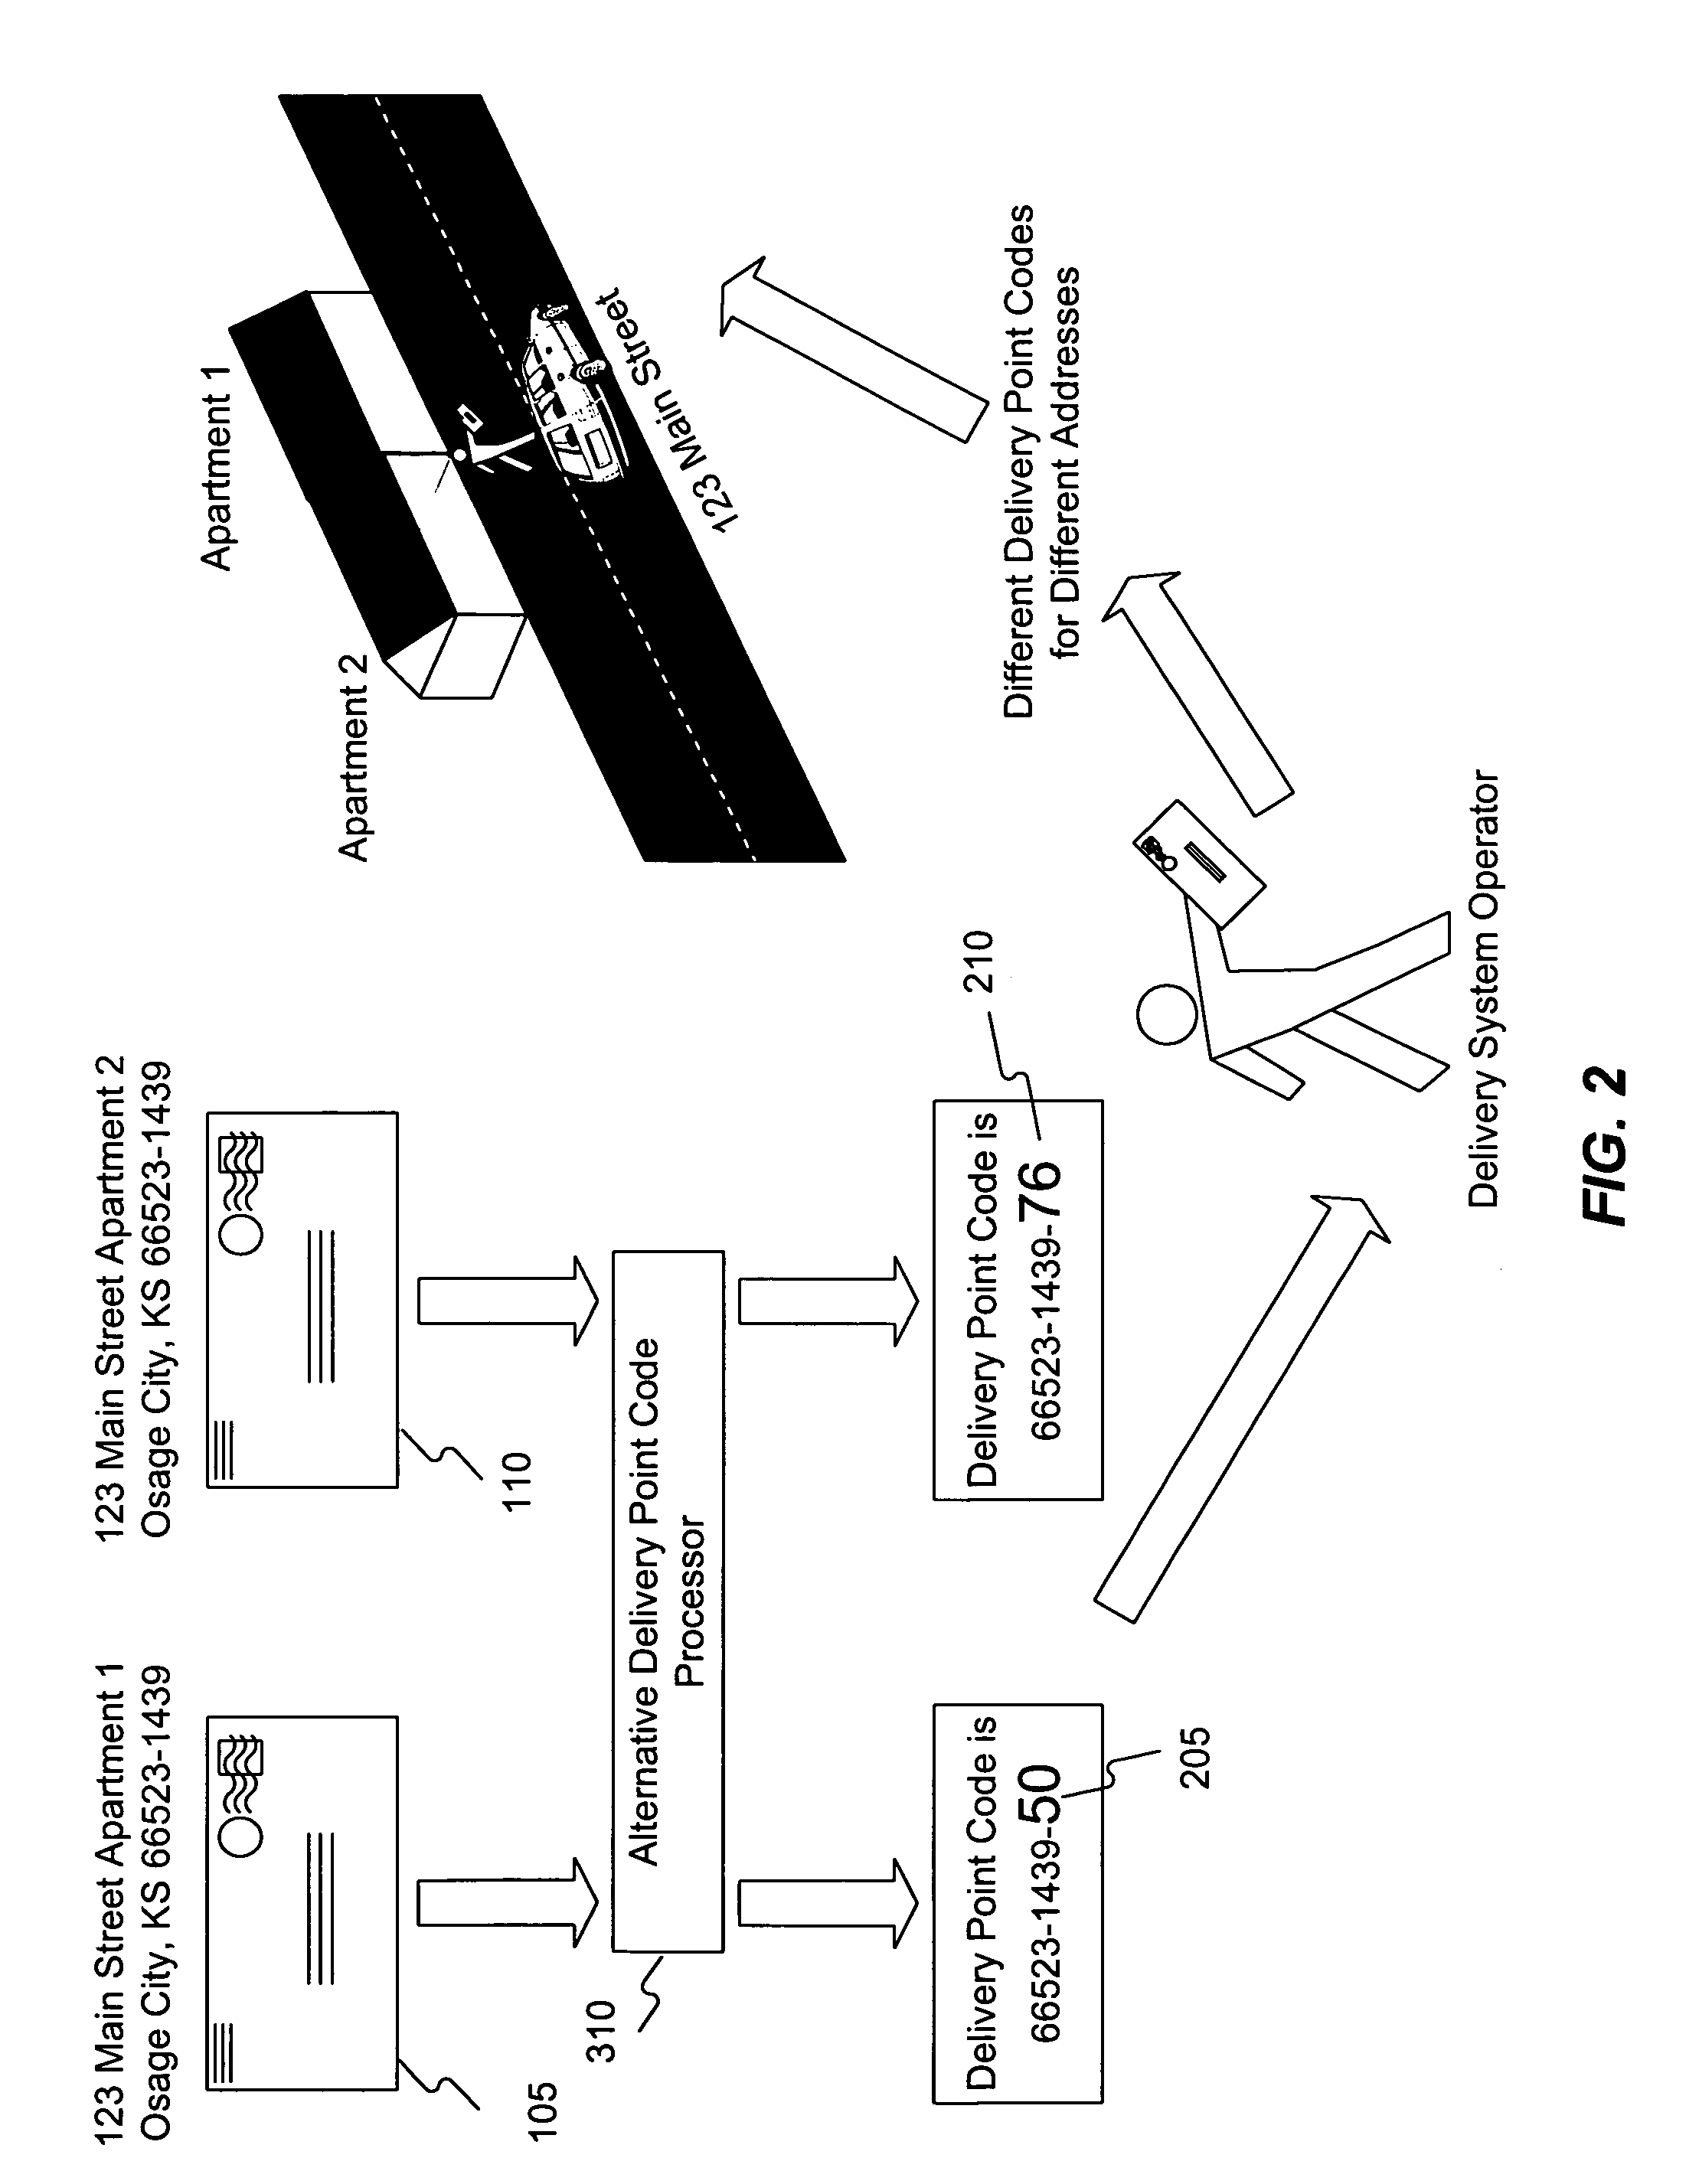 Methods and systems for providing an alternative delivery point code